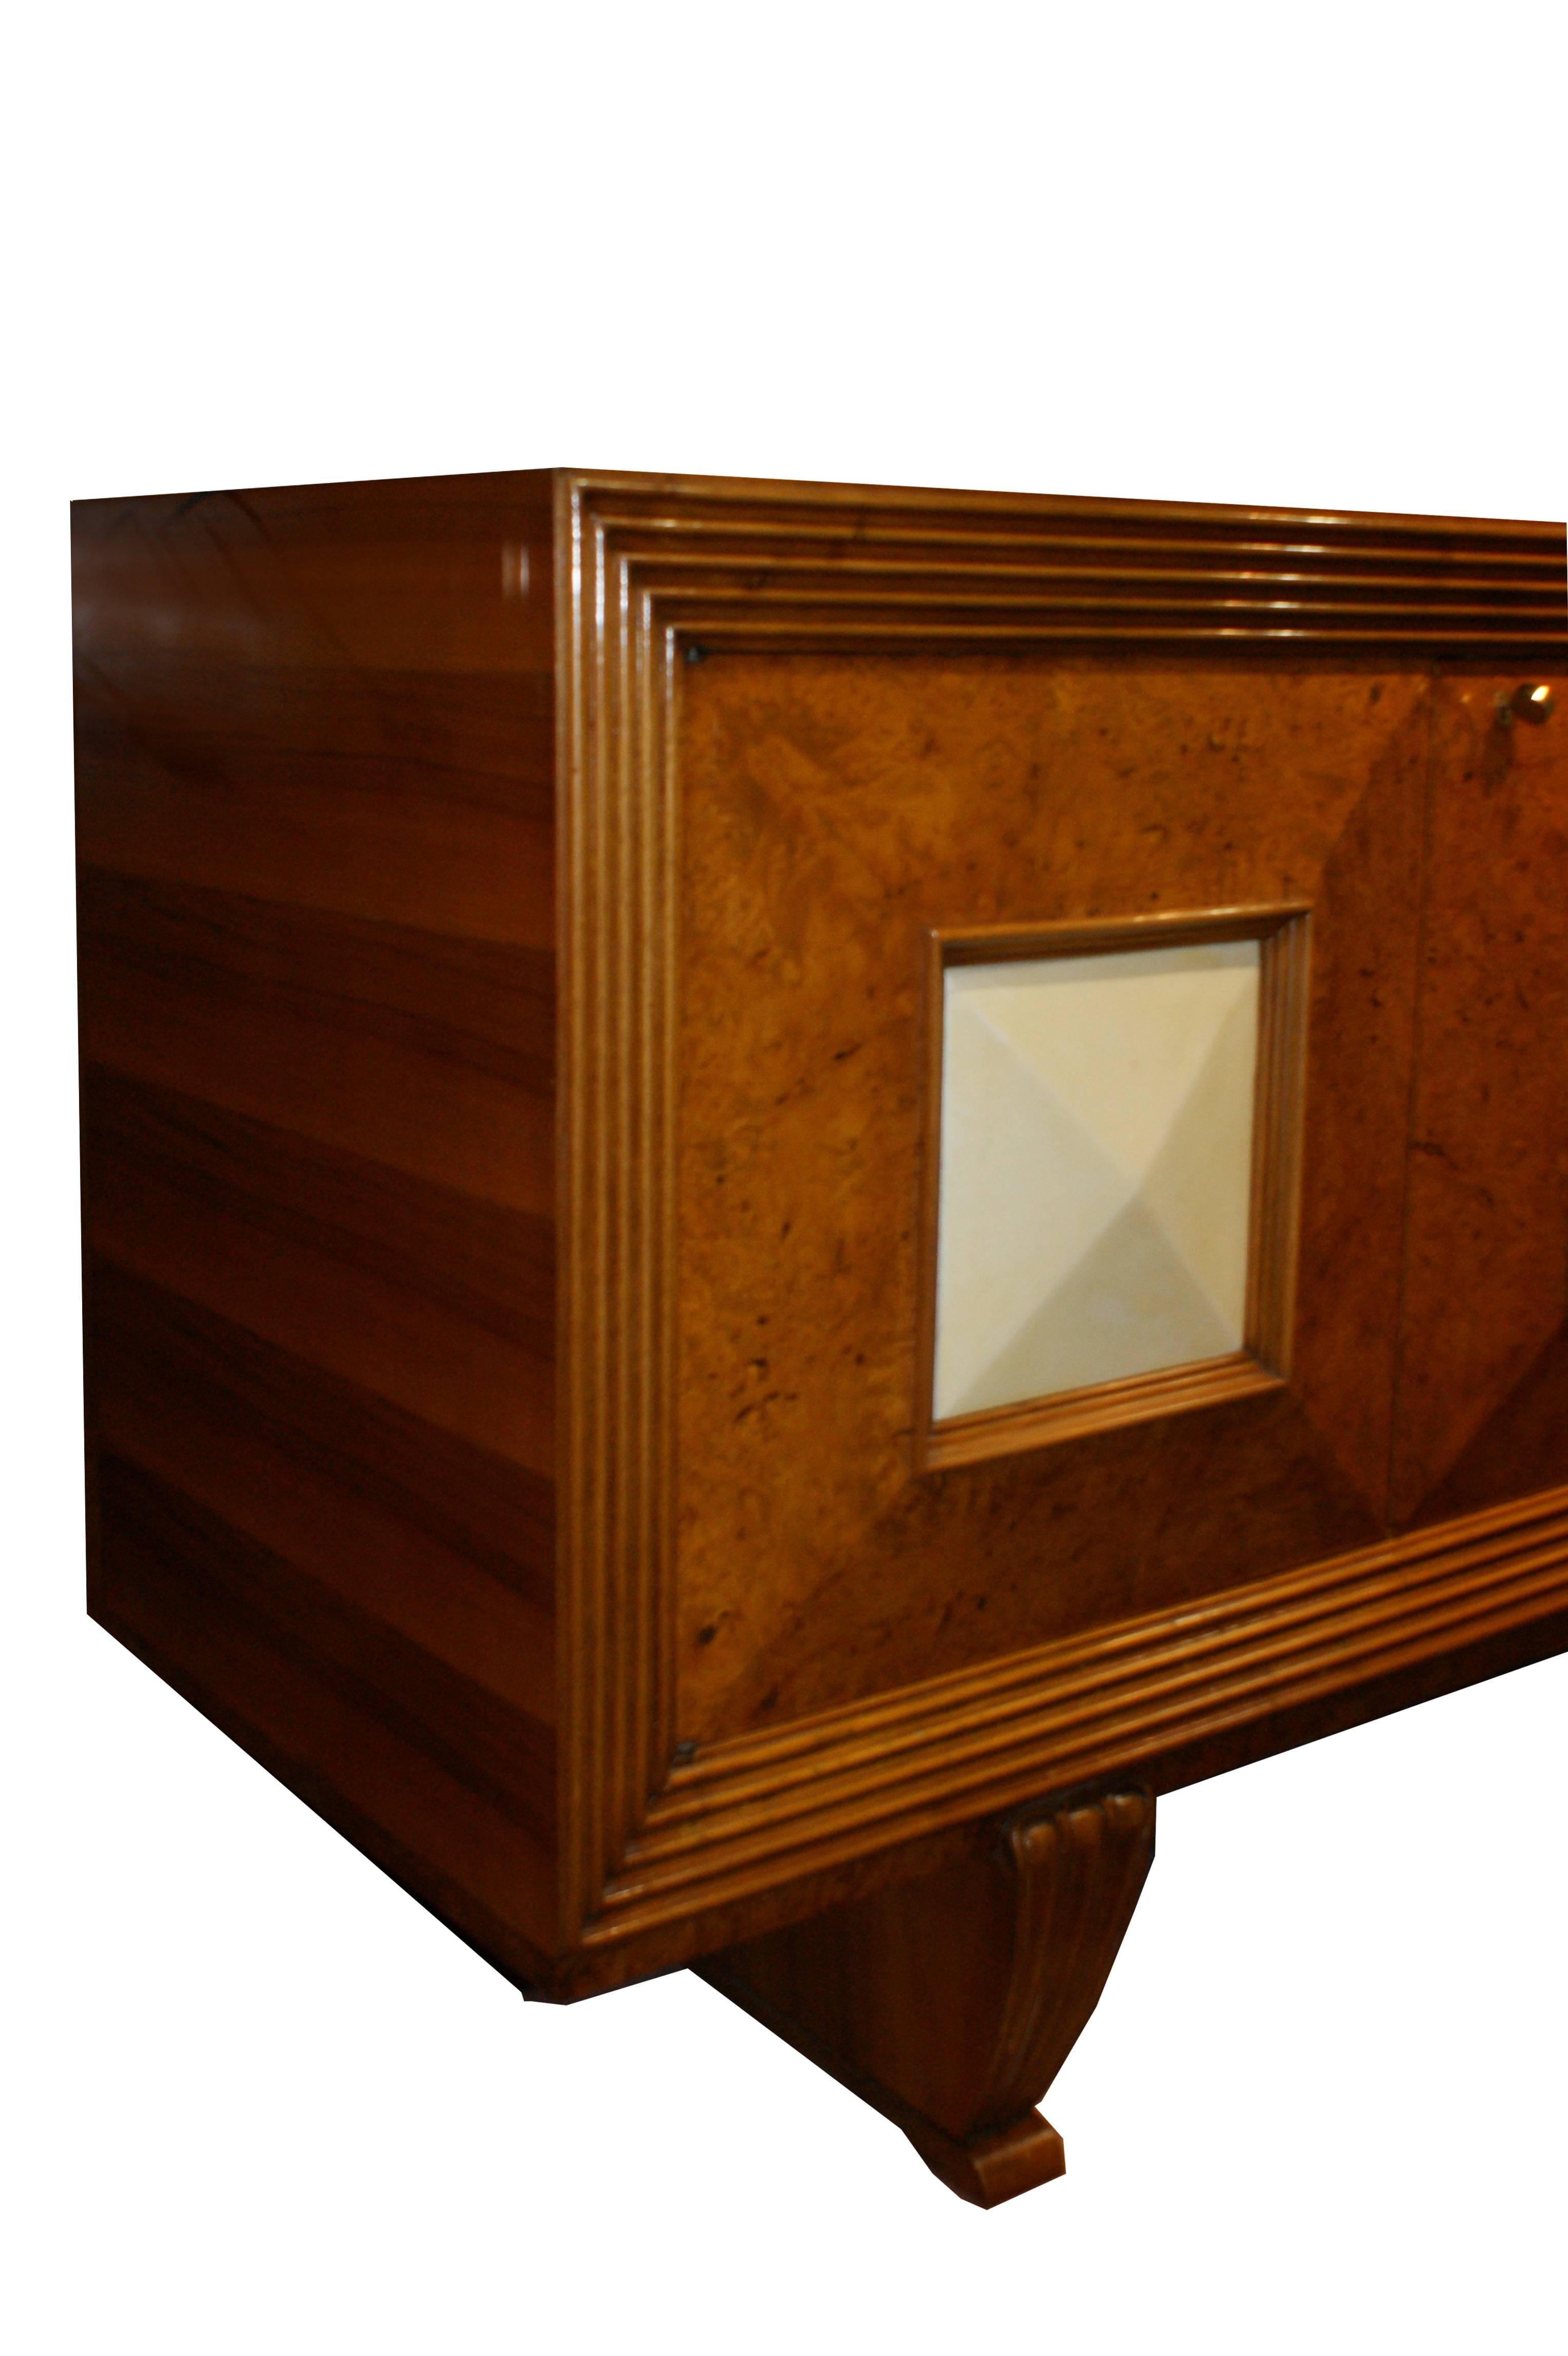 Art Deco 1930s Sideboard in Briar-Root and Parchment by Pierluigi Colli